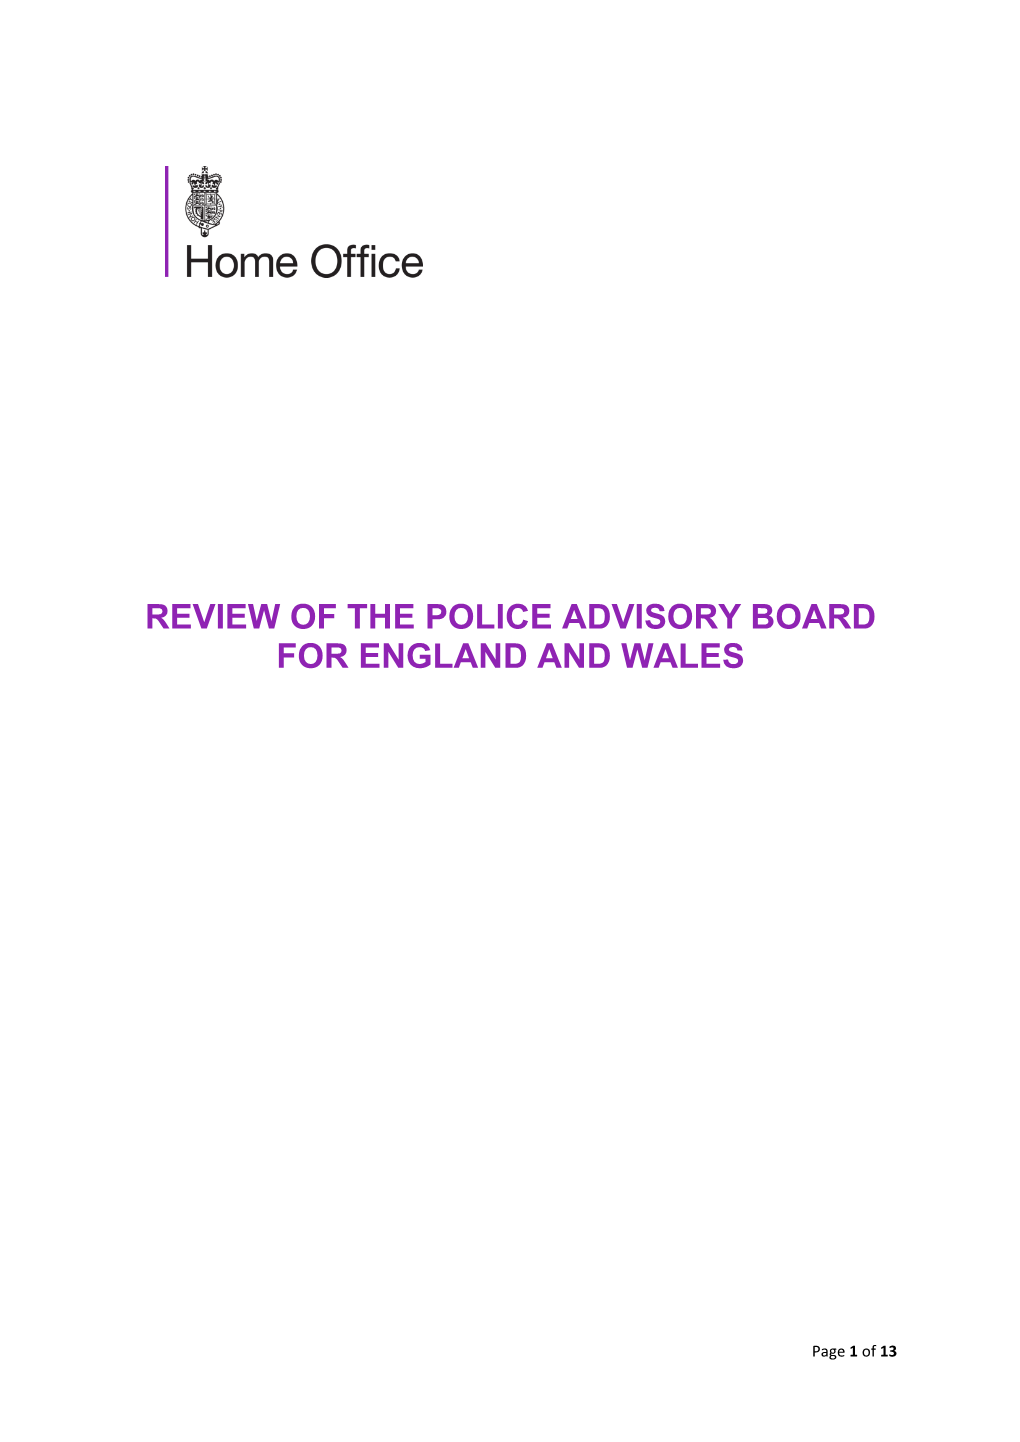 Review of the Police Advisory Board for England and Wales